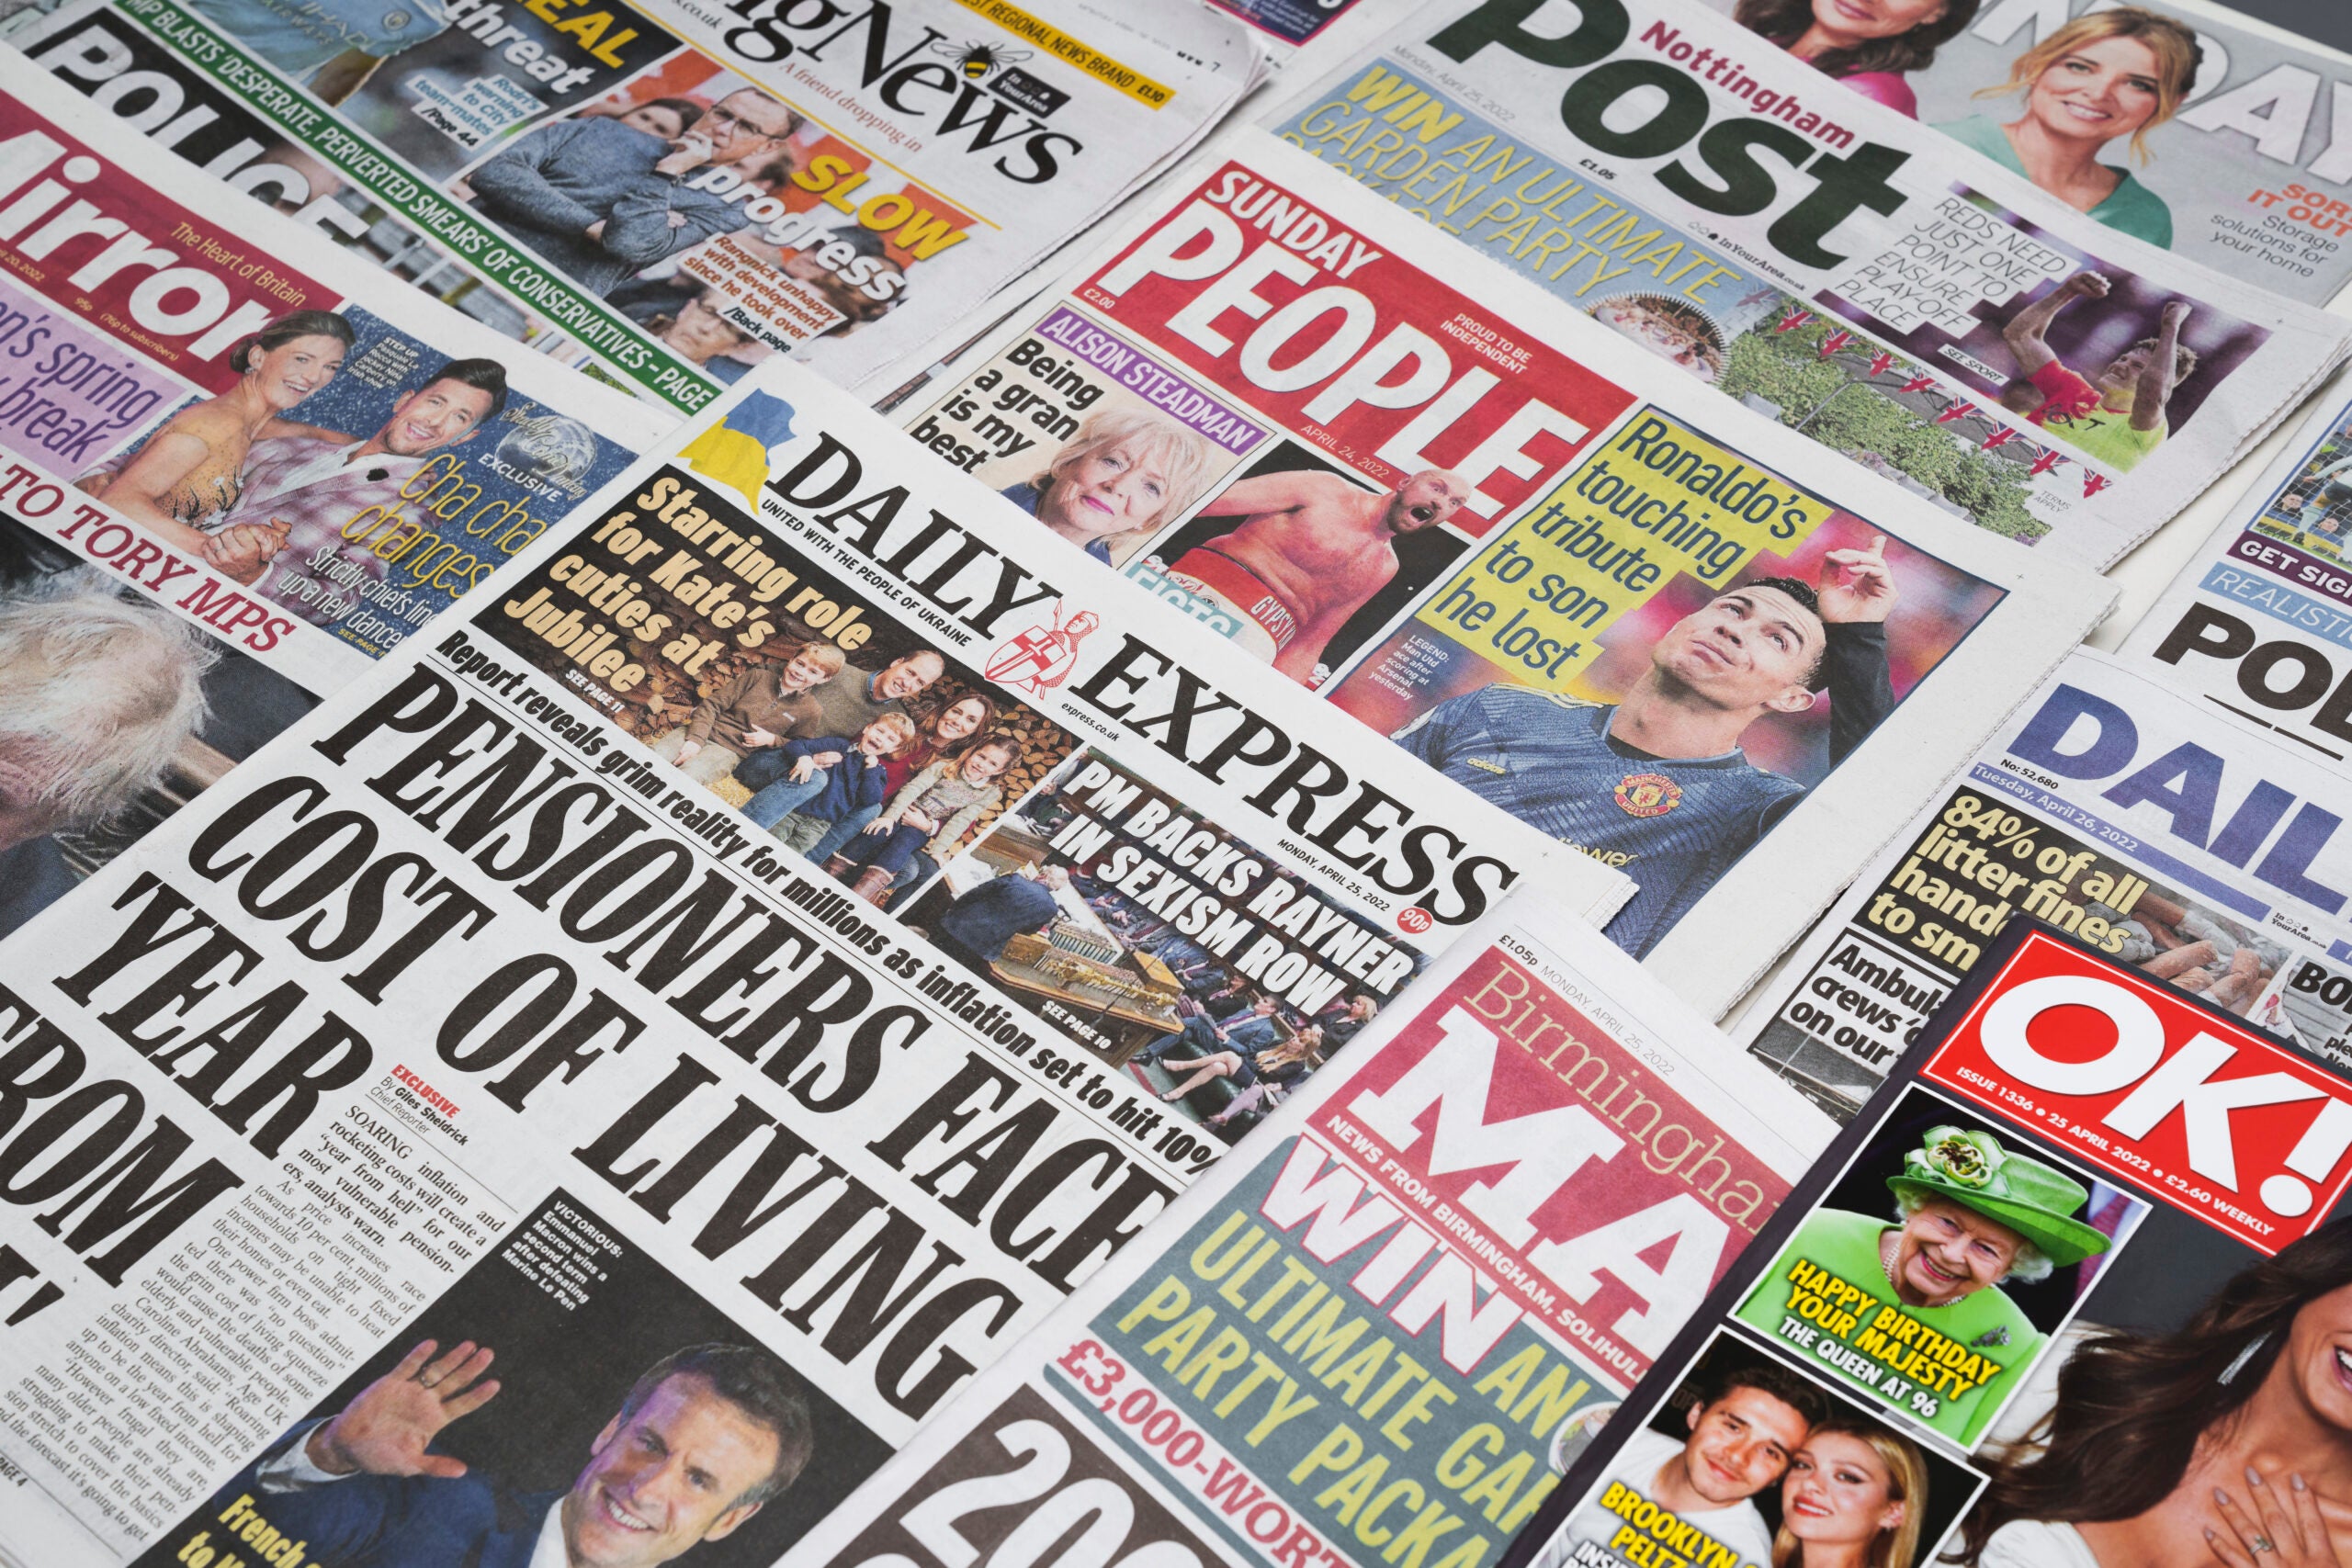 IPSO: Publishers have overhauled editorial compliance in post-Leveson era